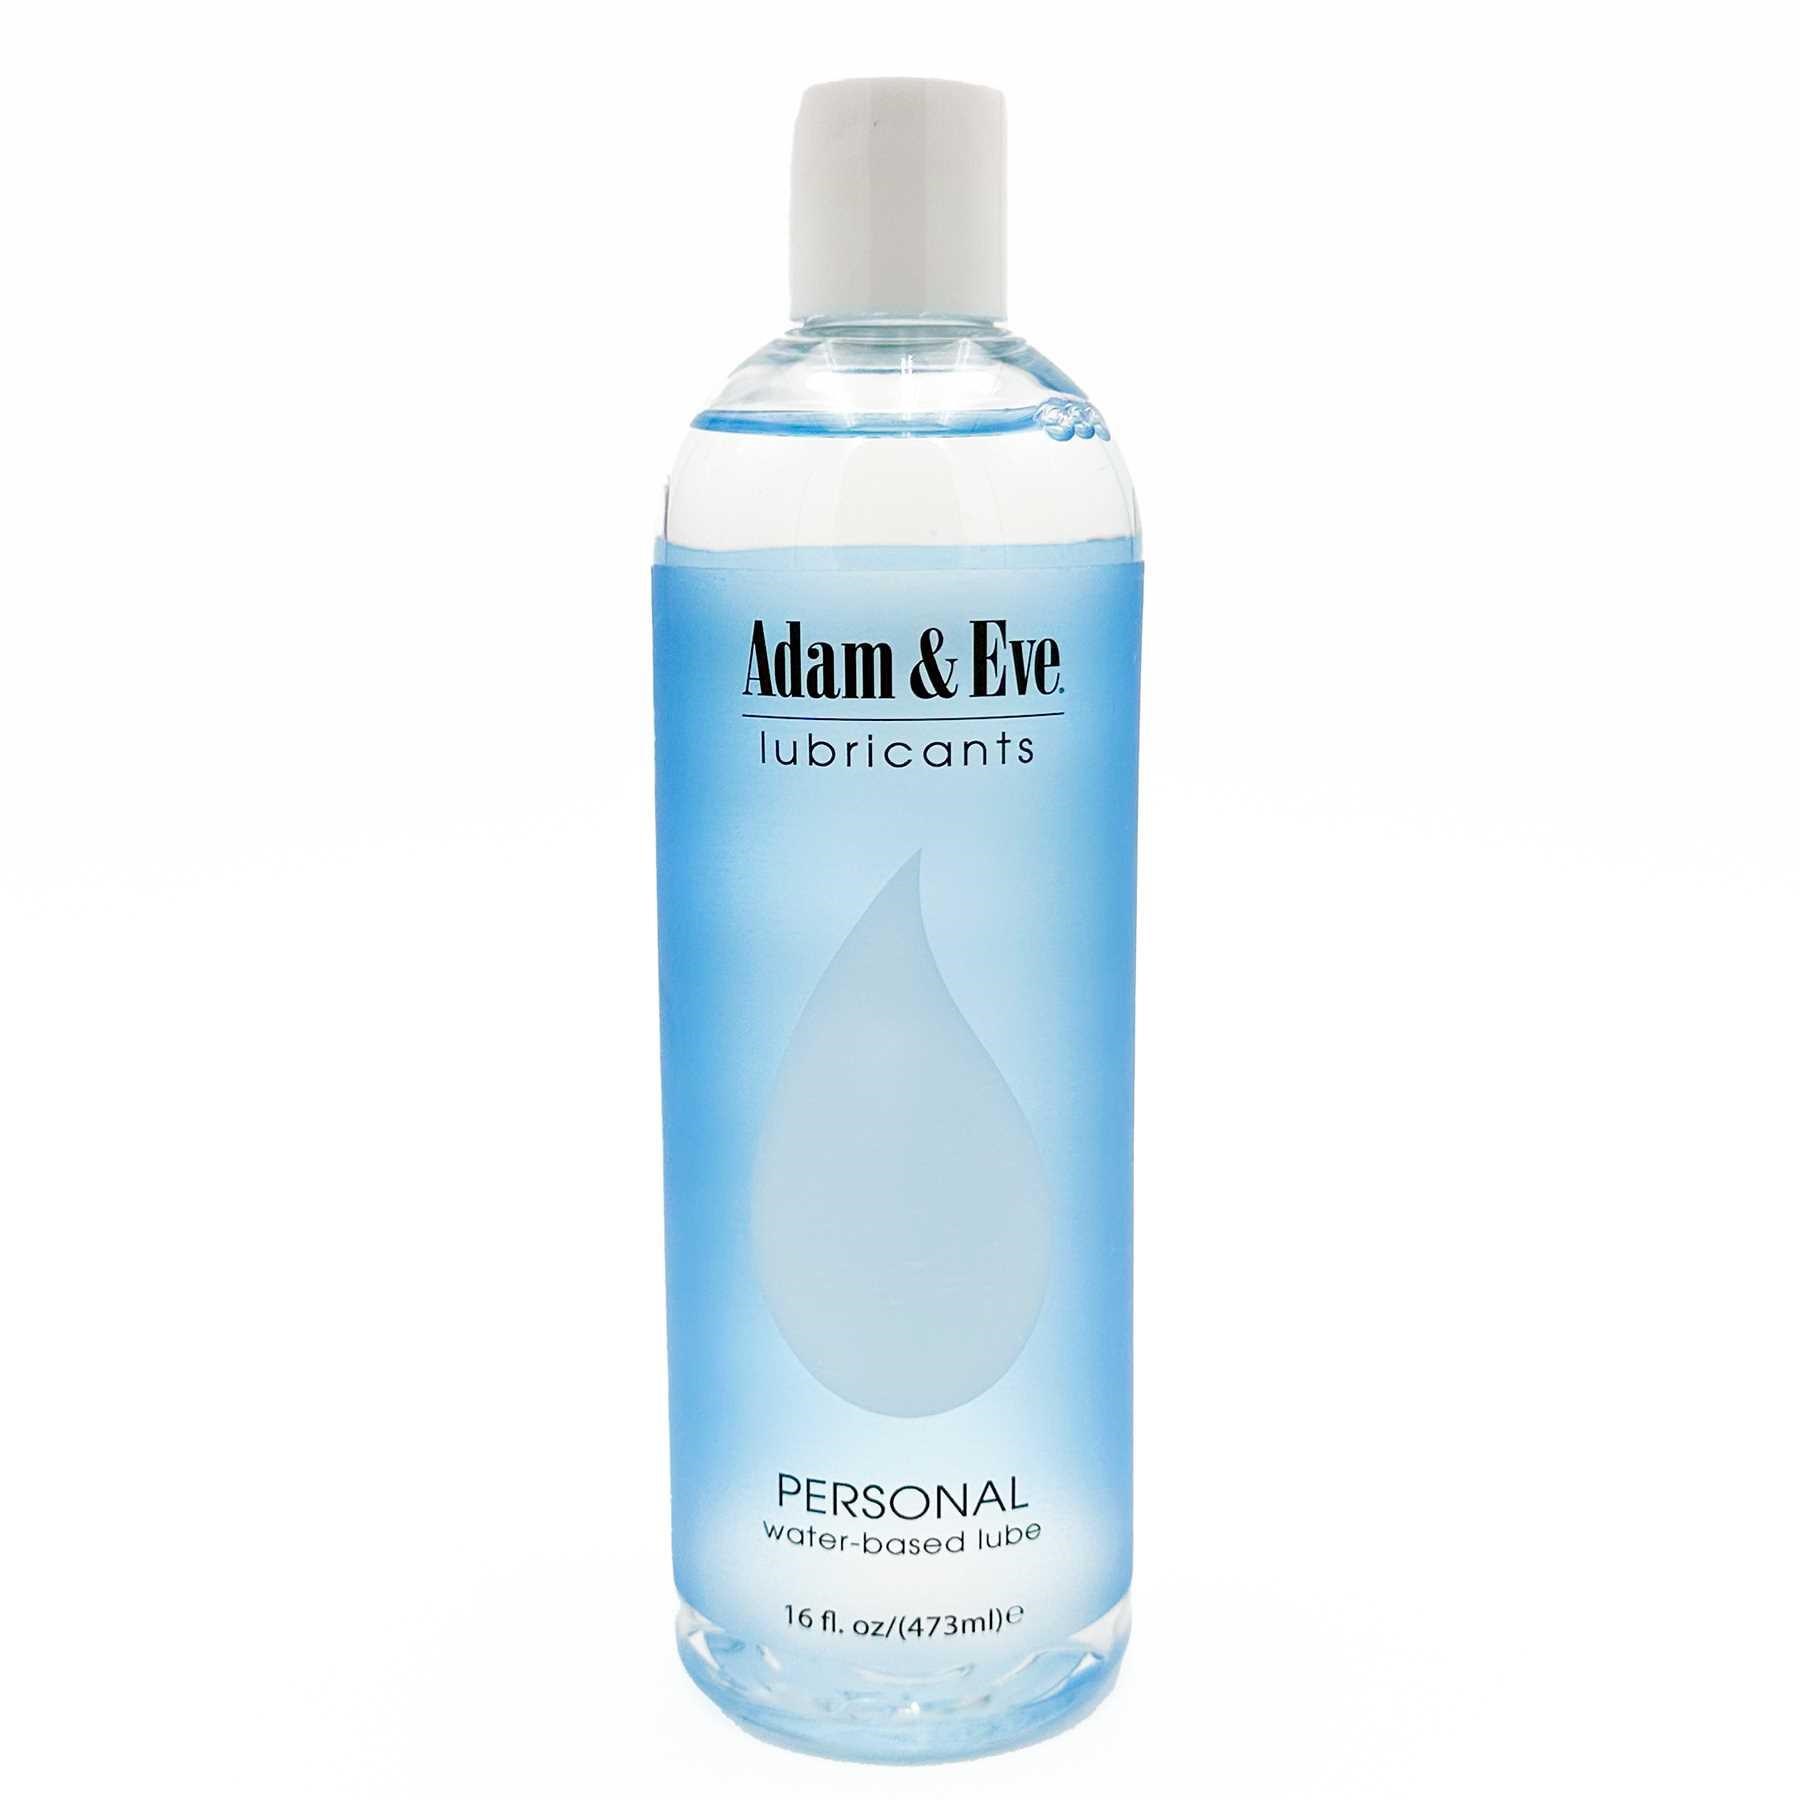 Adam & Eve Personal Lubricant 16 oz front of bottle